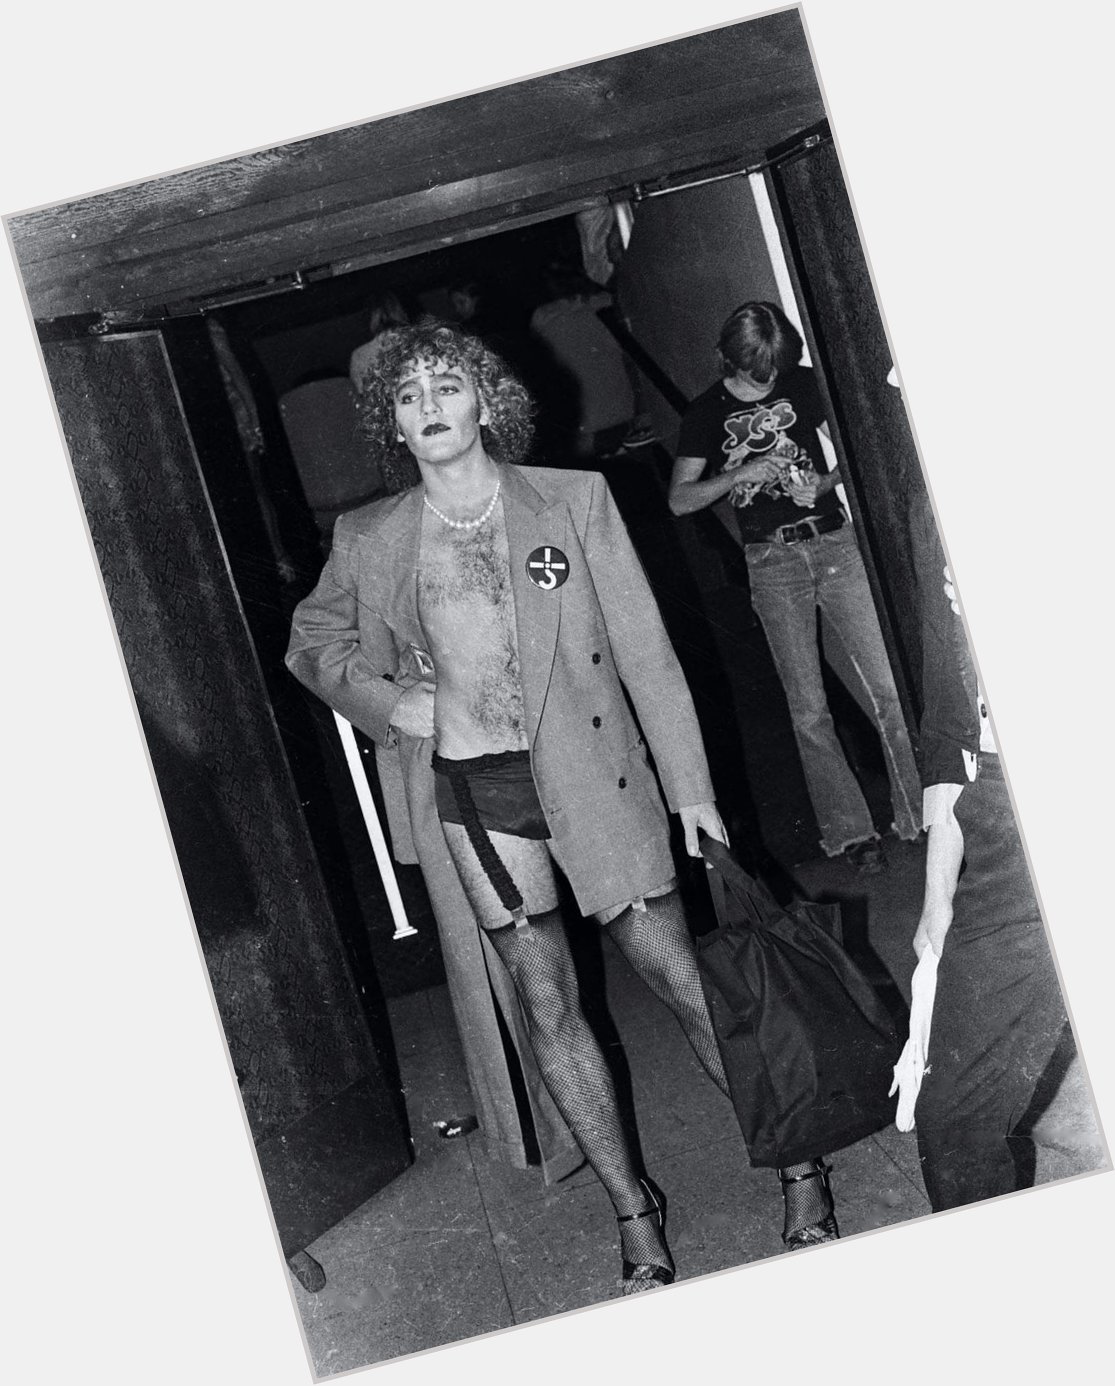 Michael Stipe in 1978 before a Rocky Horror show. Happy 61st birthday! (that s a Blue Oyster Cult pin on the coat). 